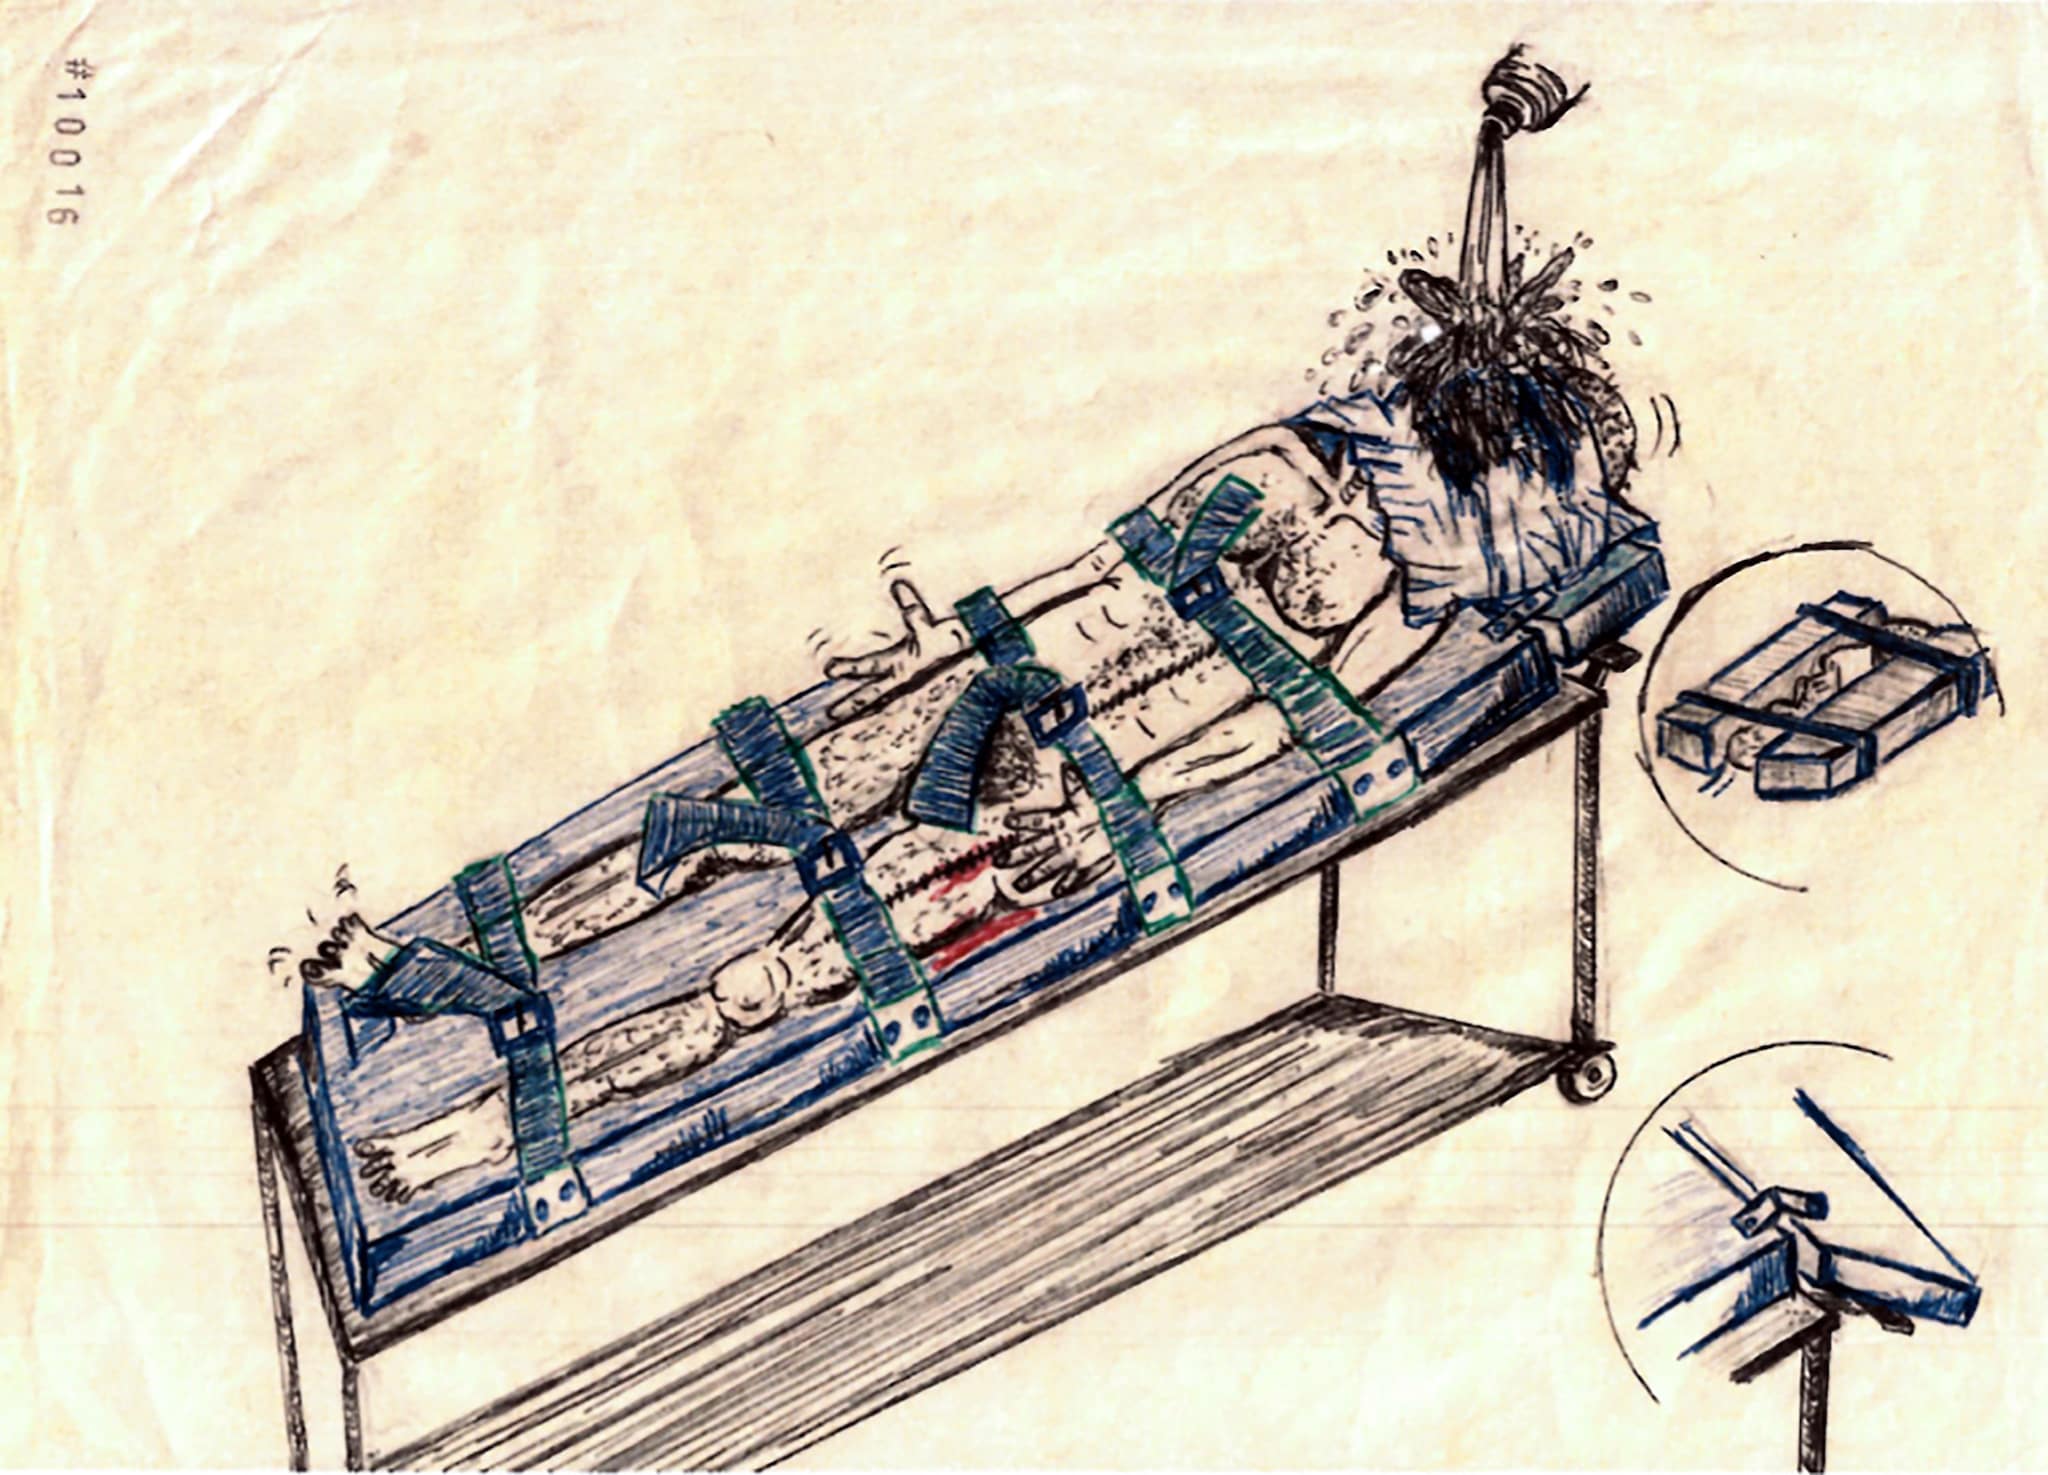 Waterboarding Walling Sleep Deprivation Prisoners Sketches Show Cia Torture At Black Sites